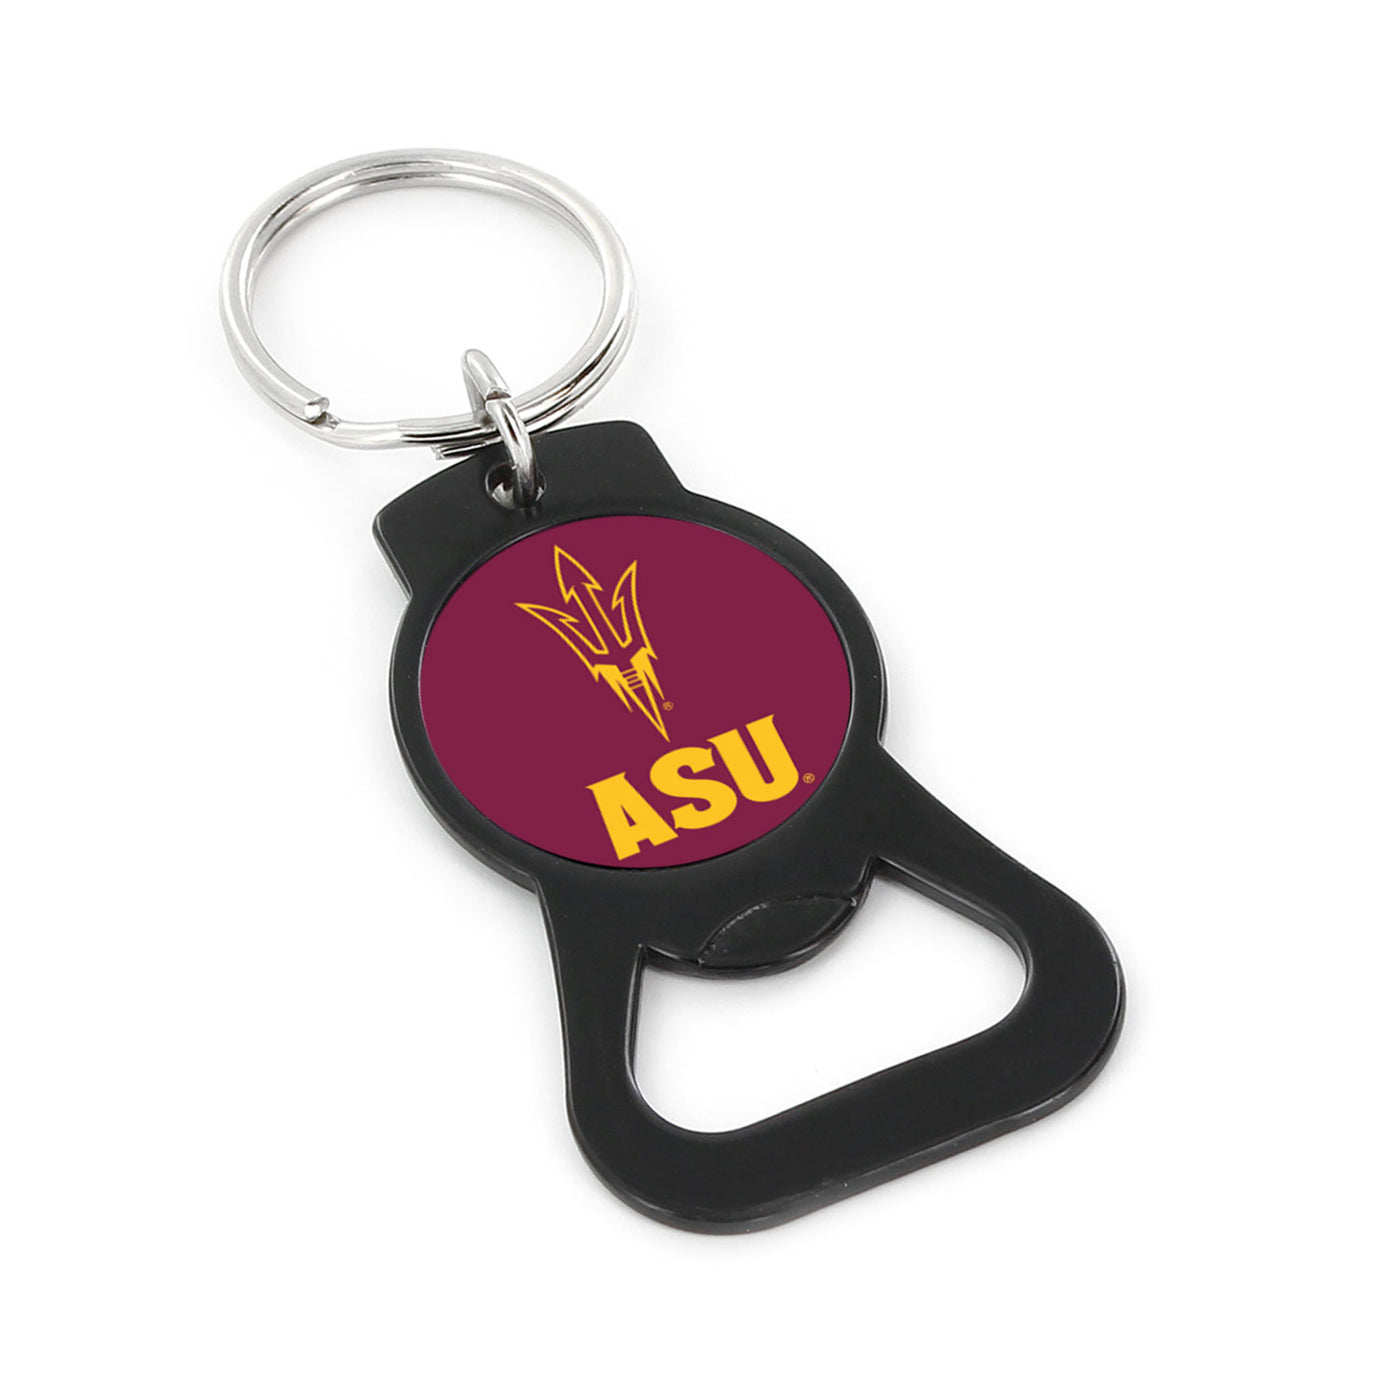 ASU black and maroon bottle opener keychain with a pitchfork and 'ASU' lettering